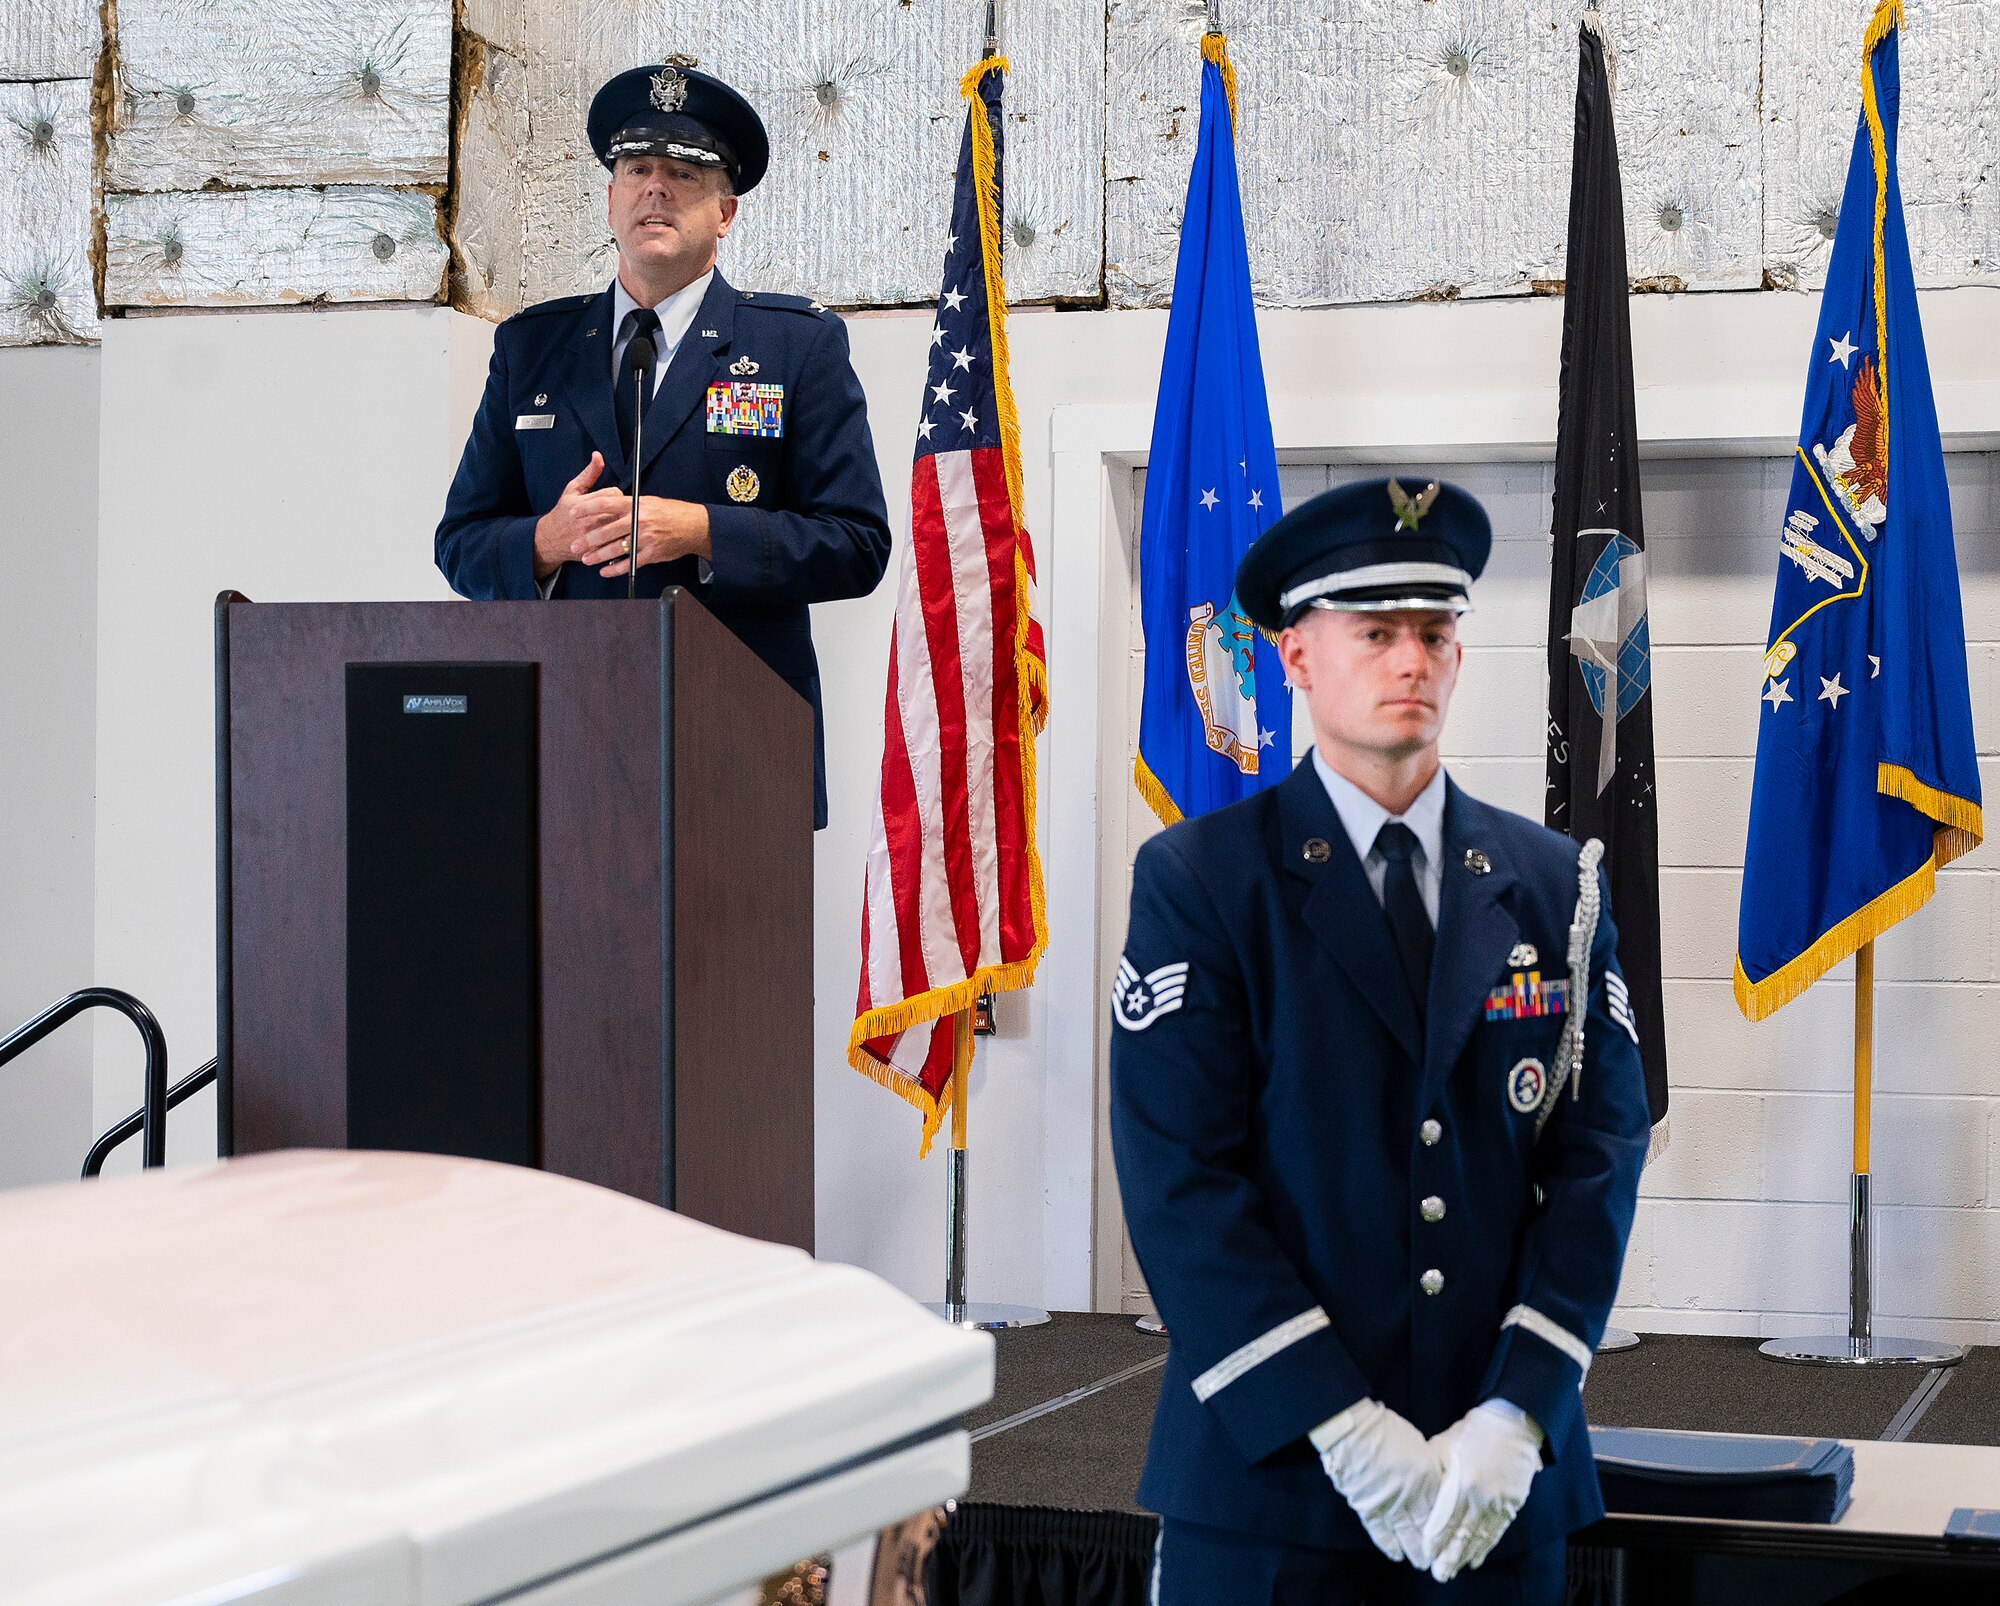 Col. Patrick Miller, 88th Air Base Wing and installation commander, speaks during the Wright-Patterson Air Force Base Honor Guard graduation ceremony, April 25, 2022. Thirty-nine Airmen from units across the base underwent more than 50 hours of training to become proficient in the customs and courtesies they will need during their six-month tour with the guard. (U.S. Air Force photo by R.J. Oriez)